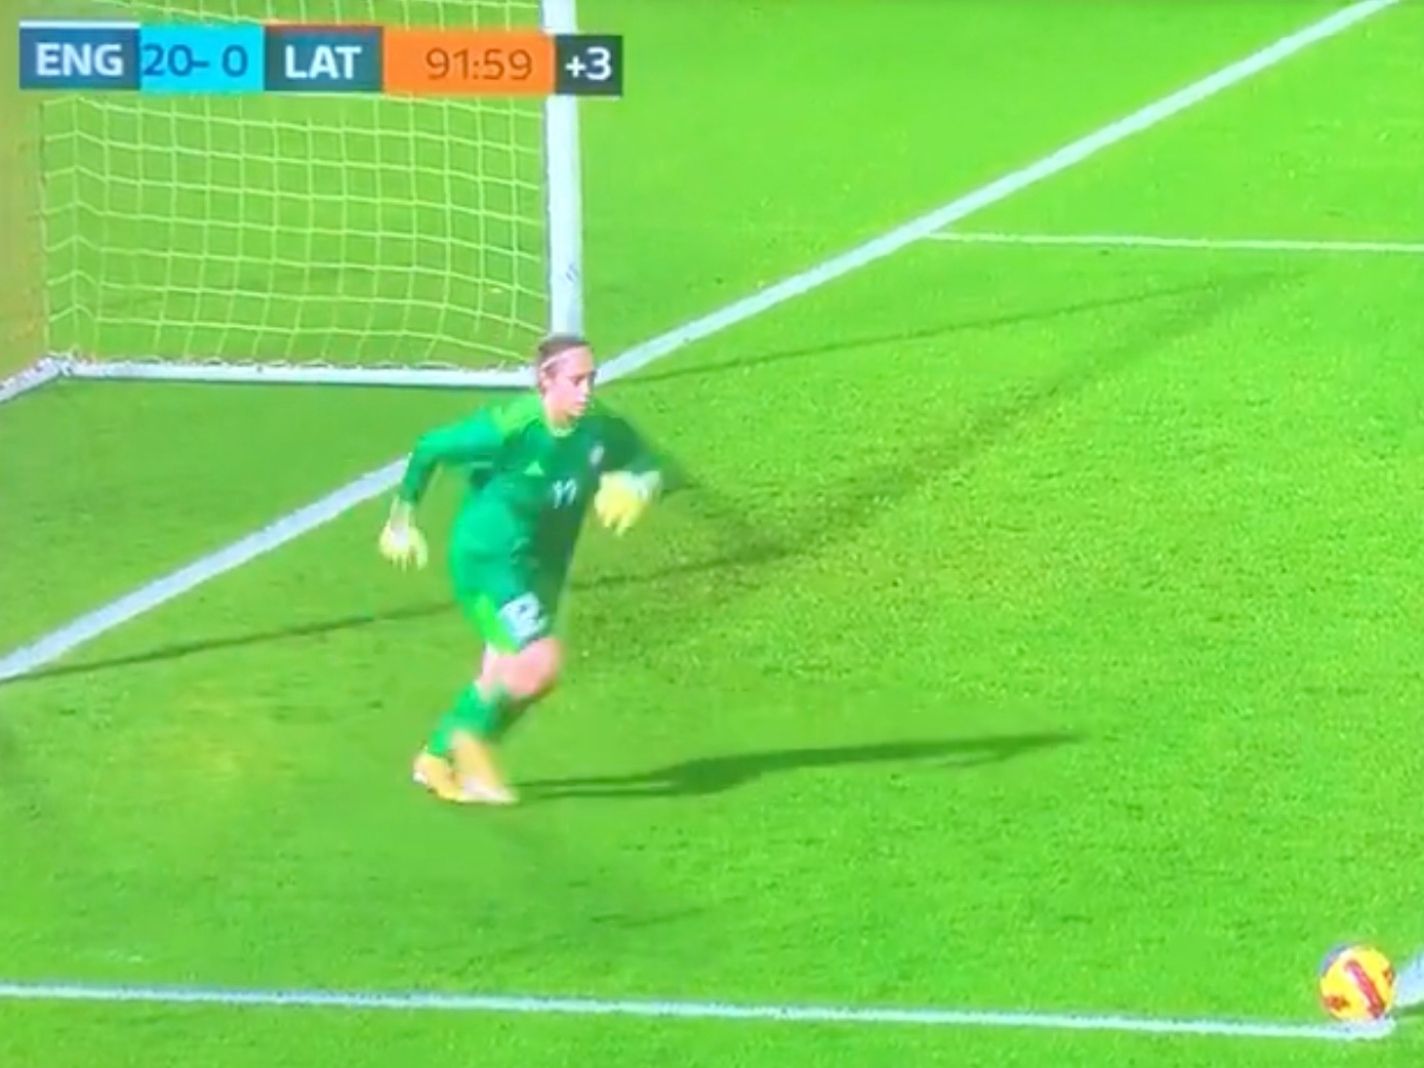 The awful miskick that summed up the gulf in class between Latvia and England